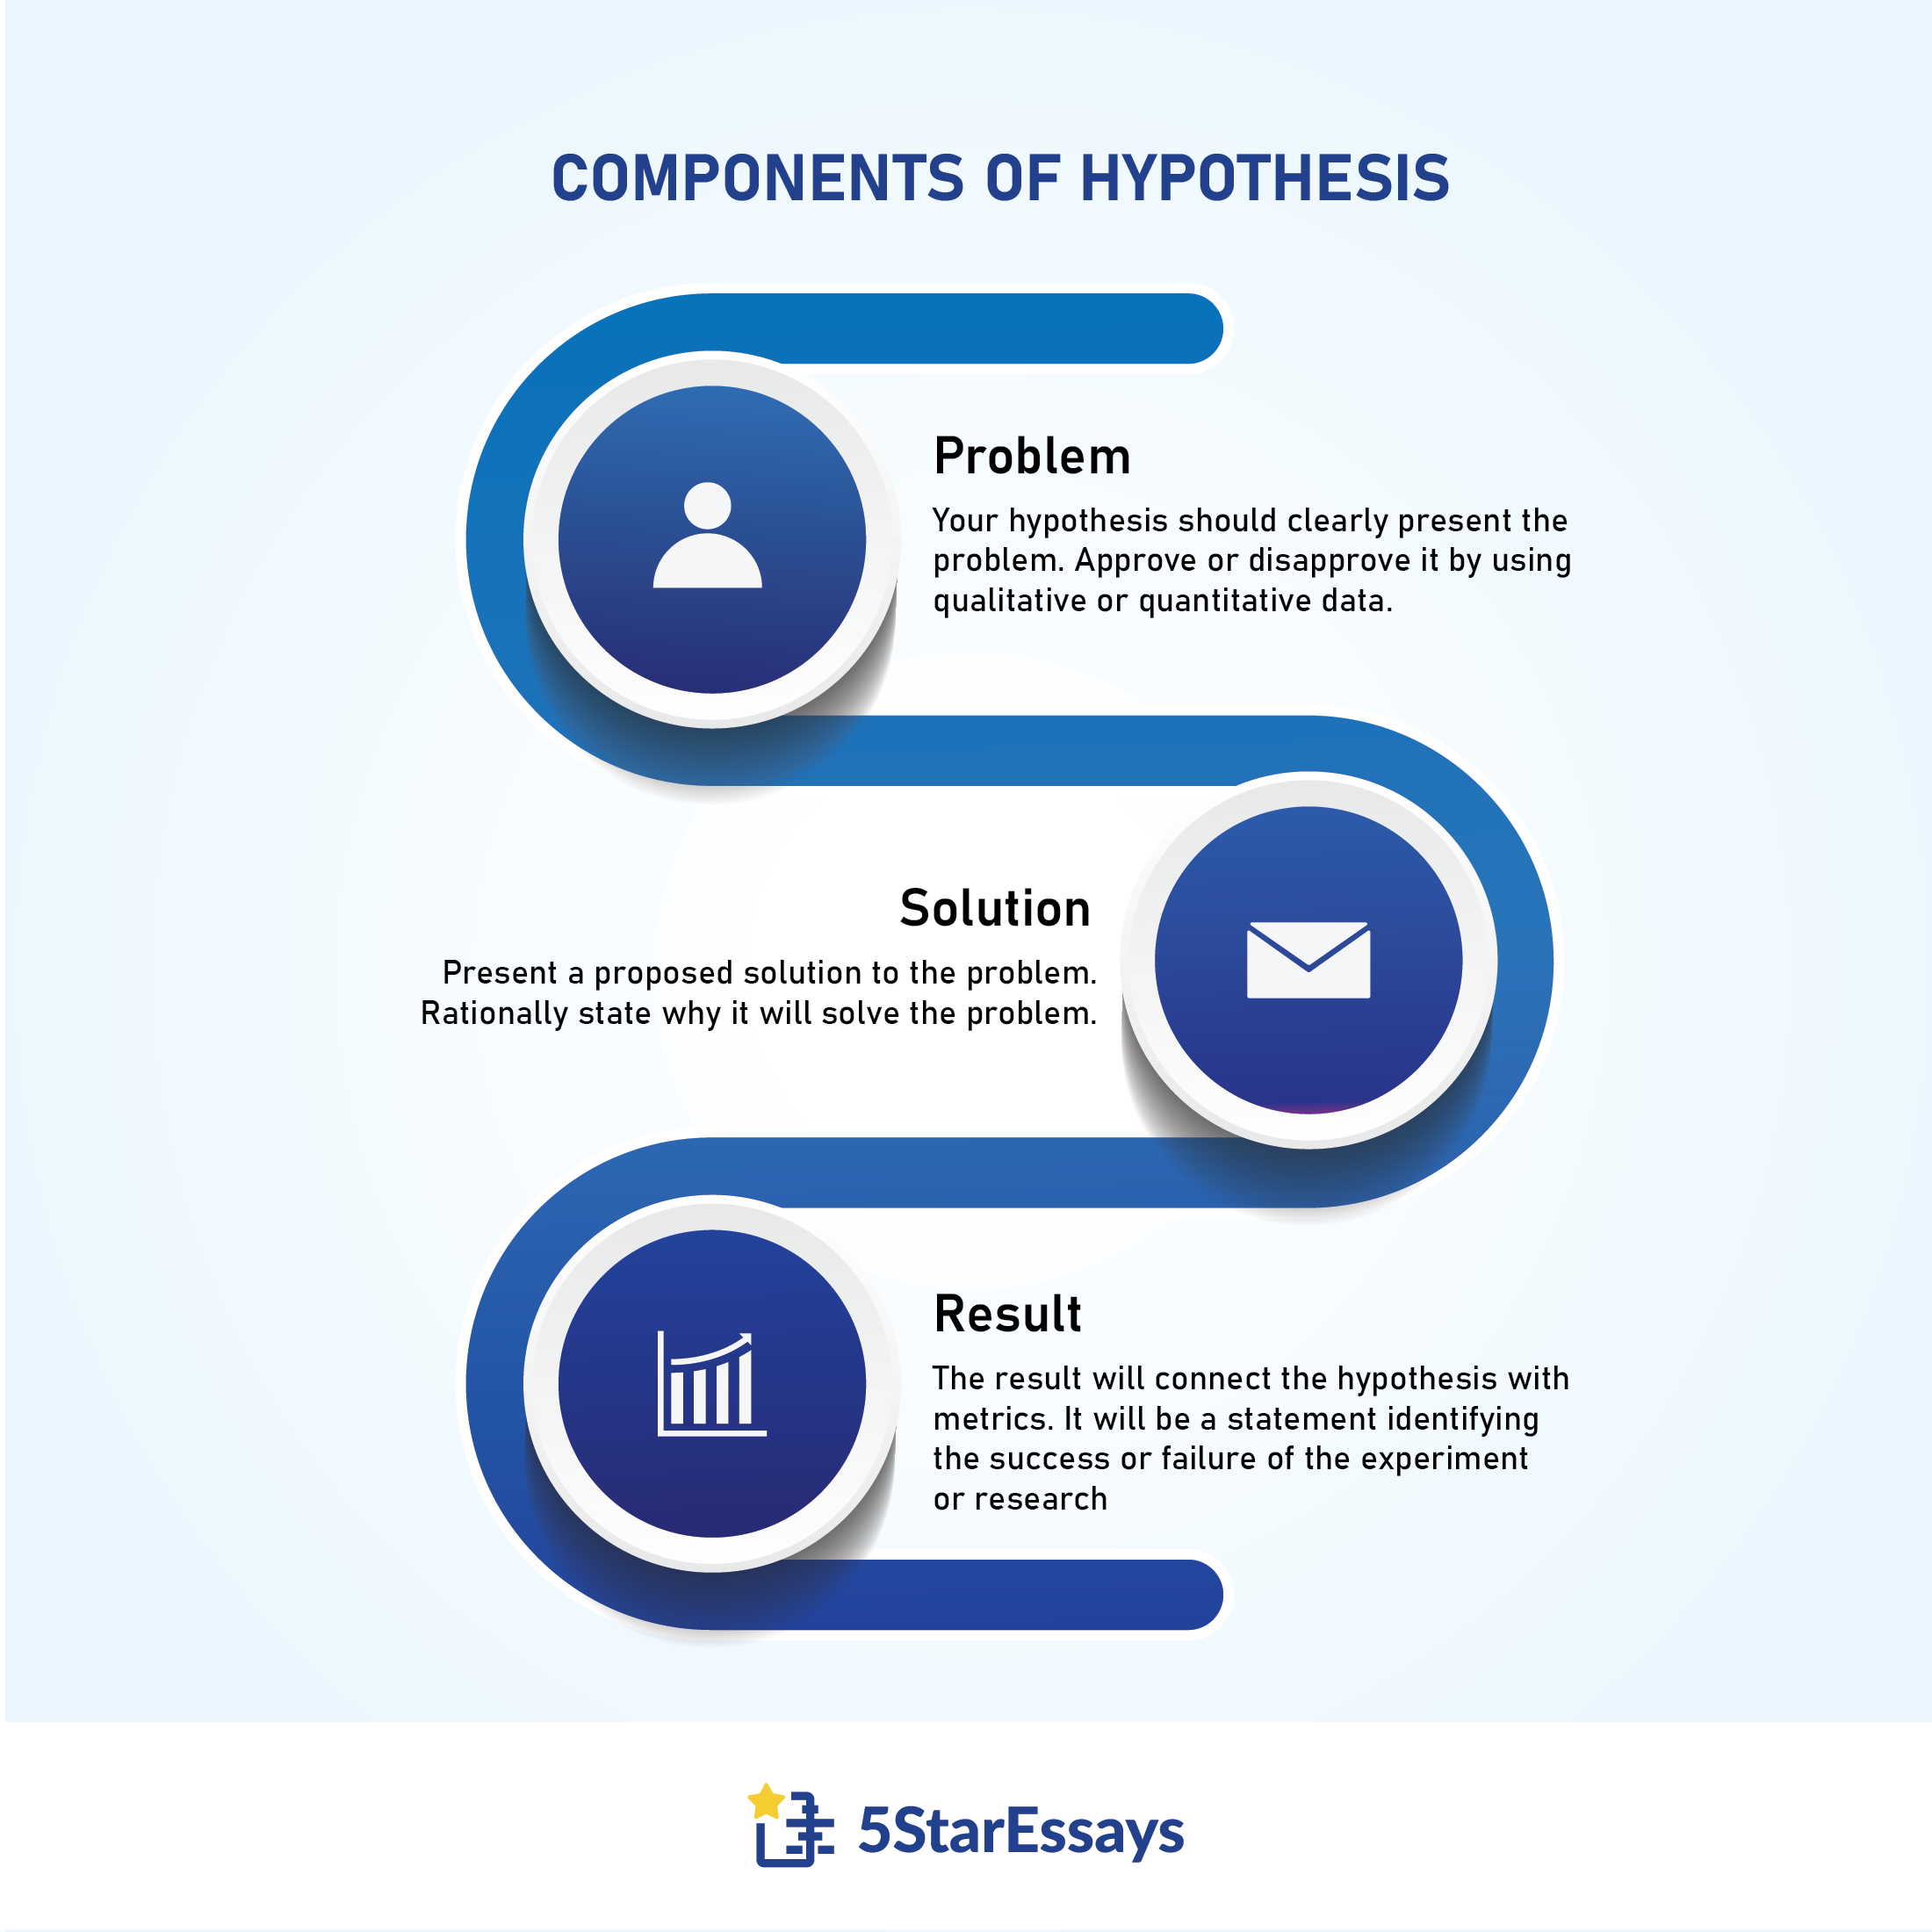 Components of Hypothesis